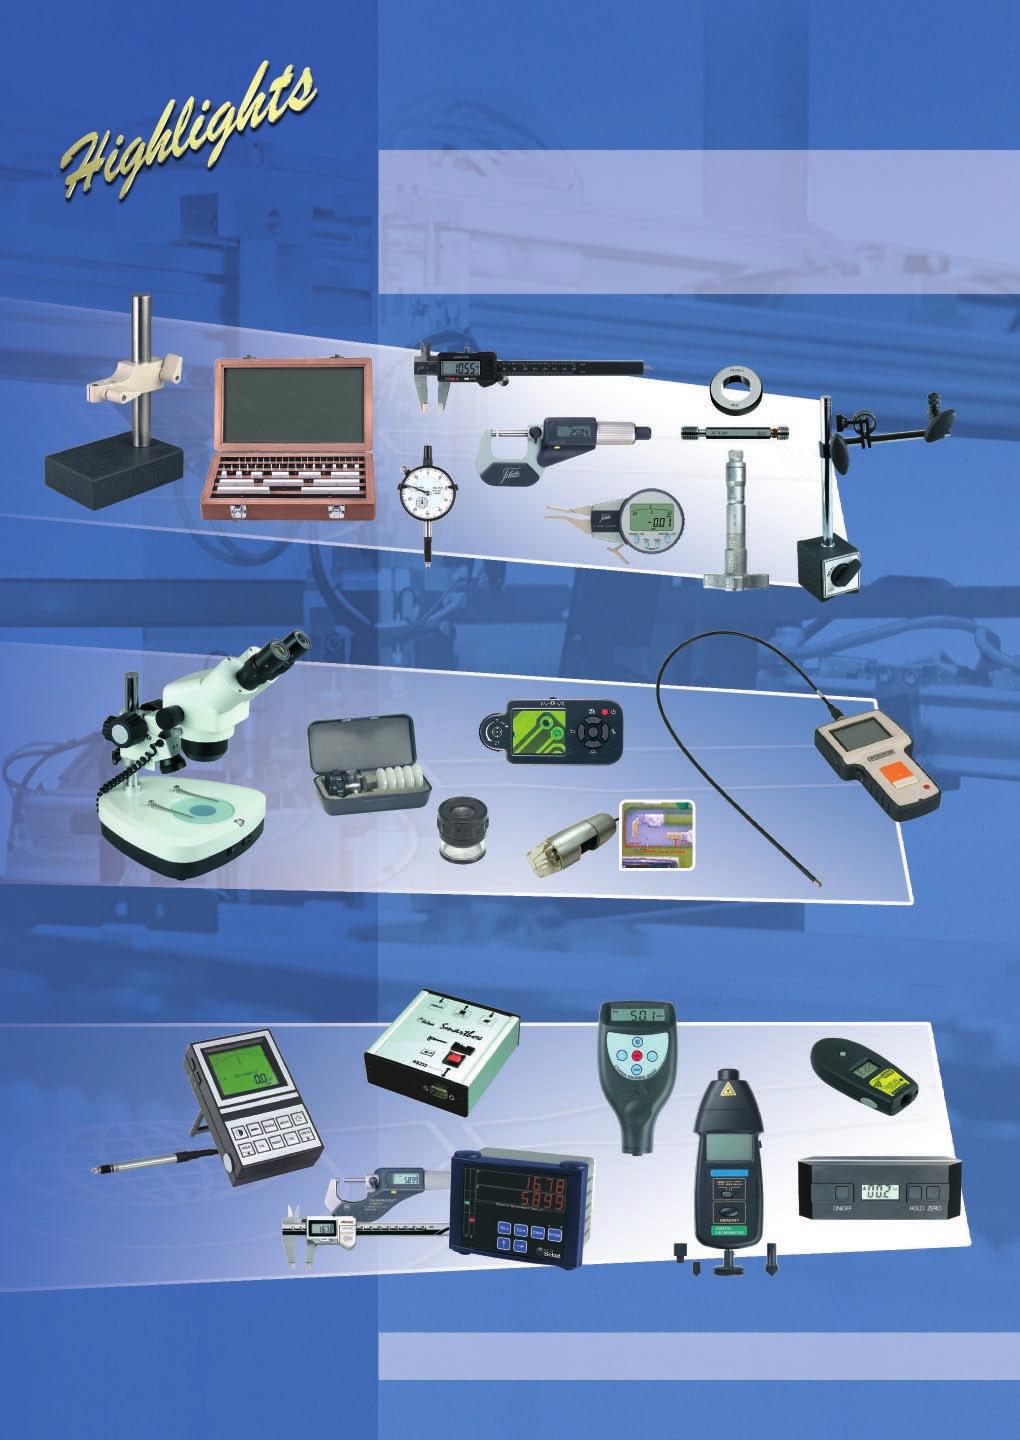 Measuring instruments and systems